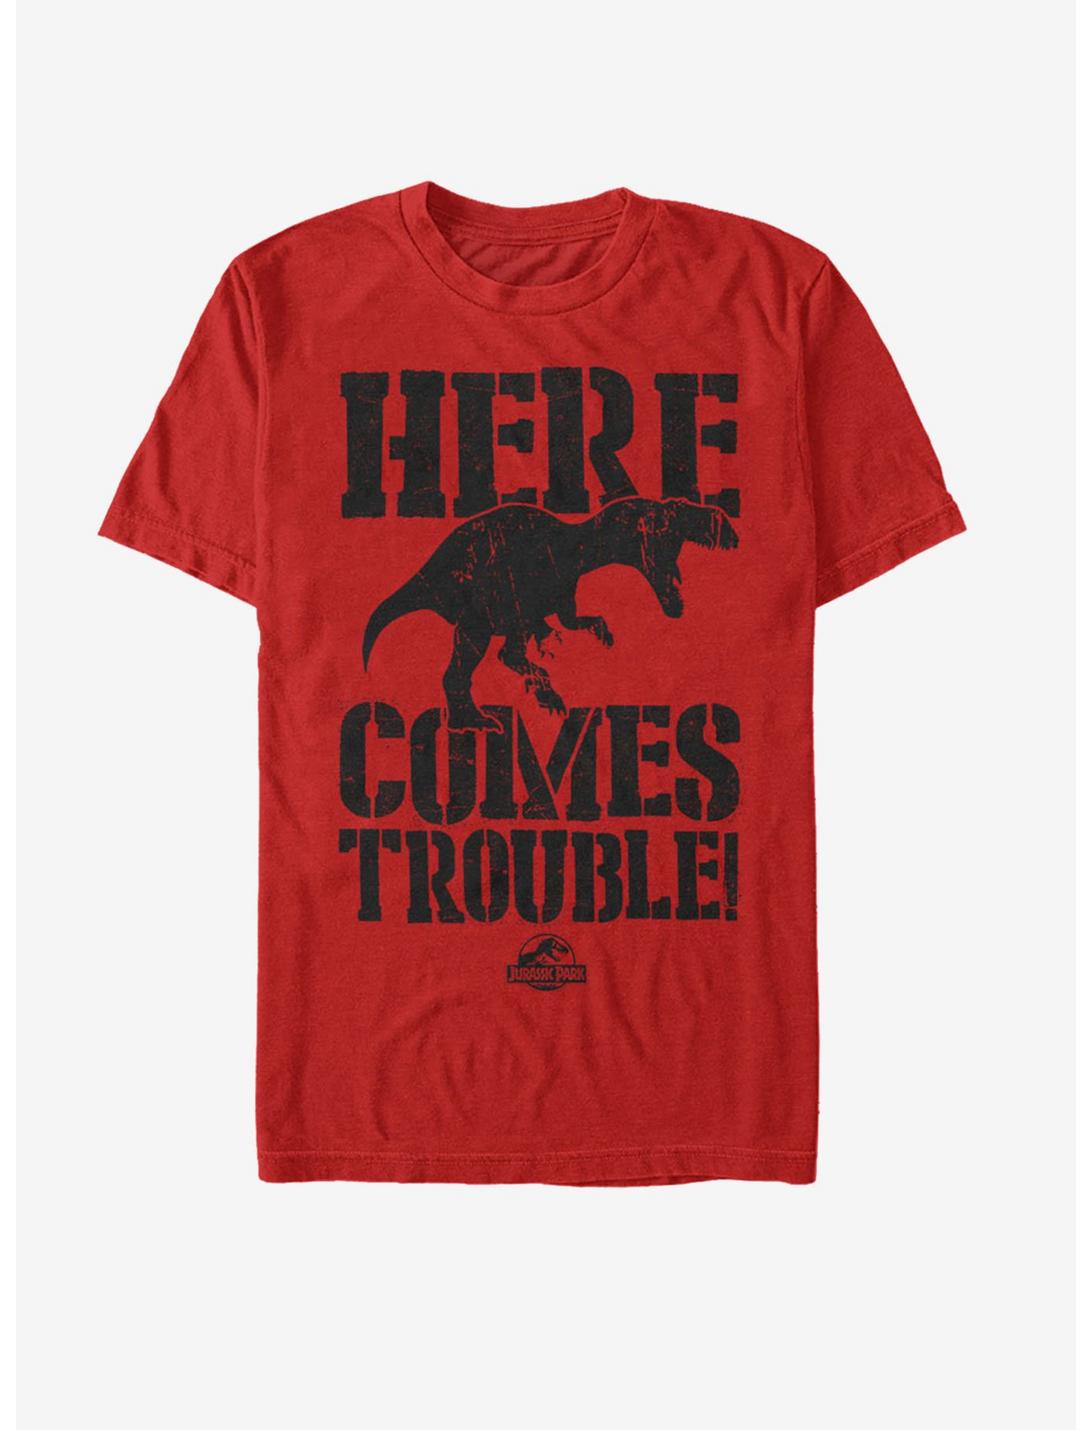 Jurassic Park Dino Trouble T-Shirt, RED, hi-res